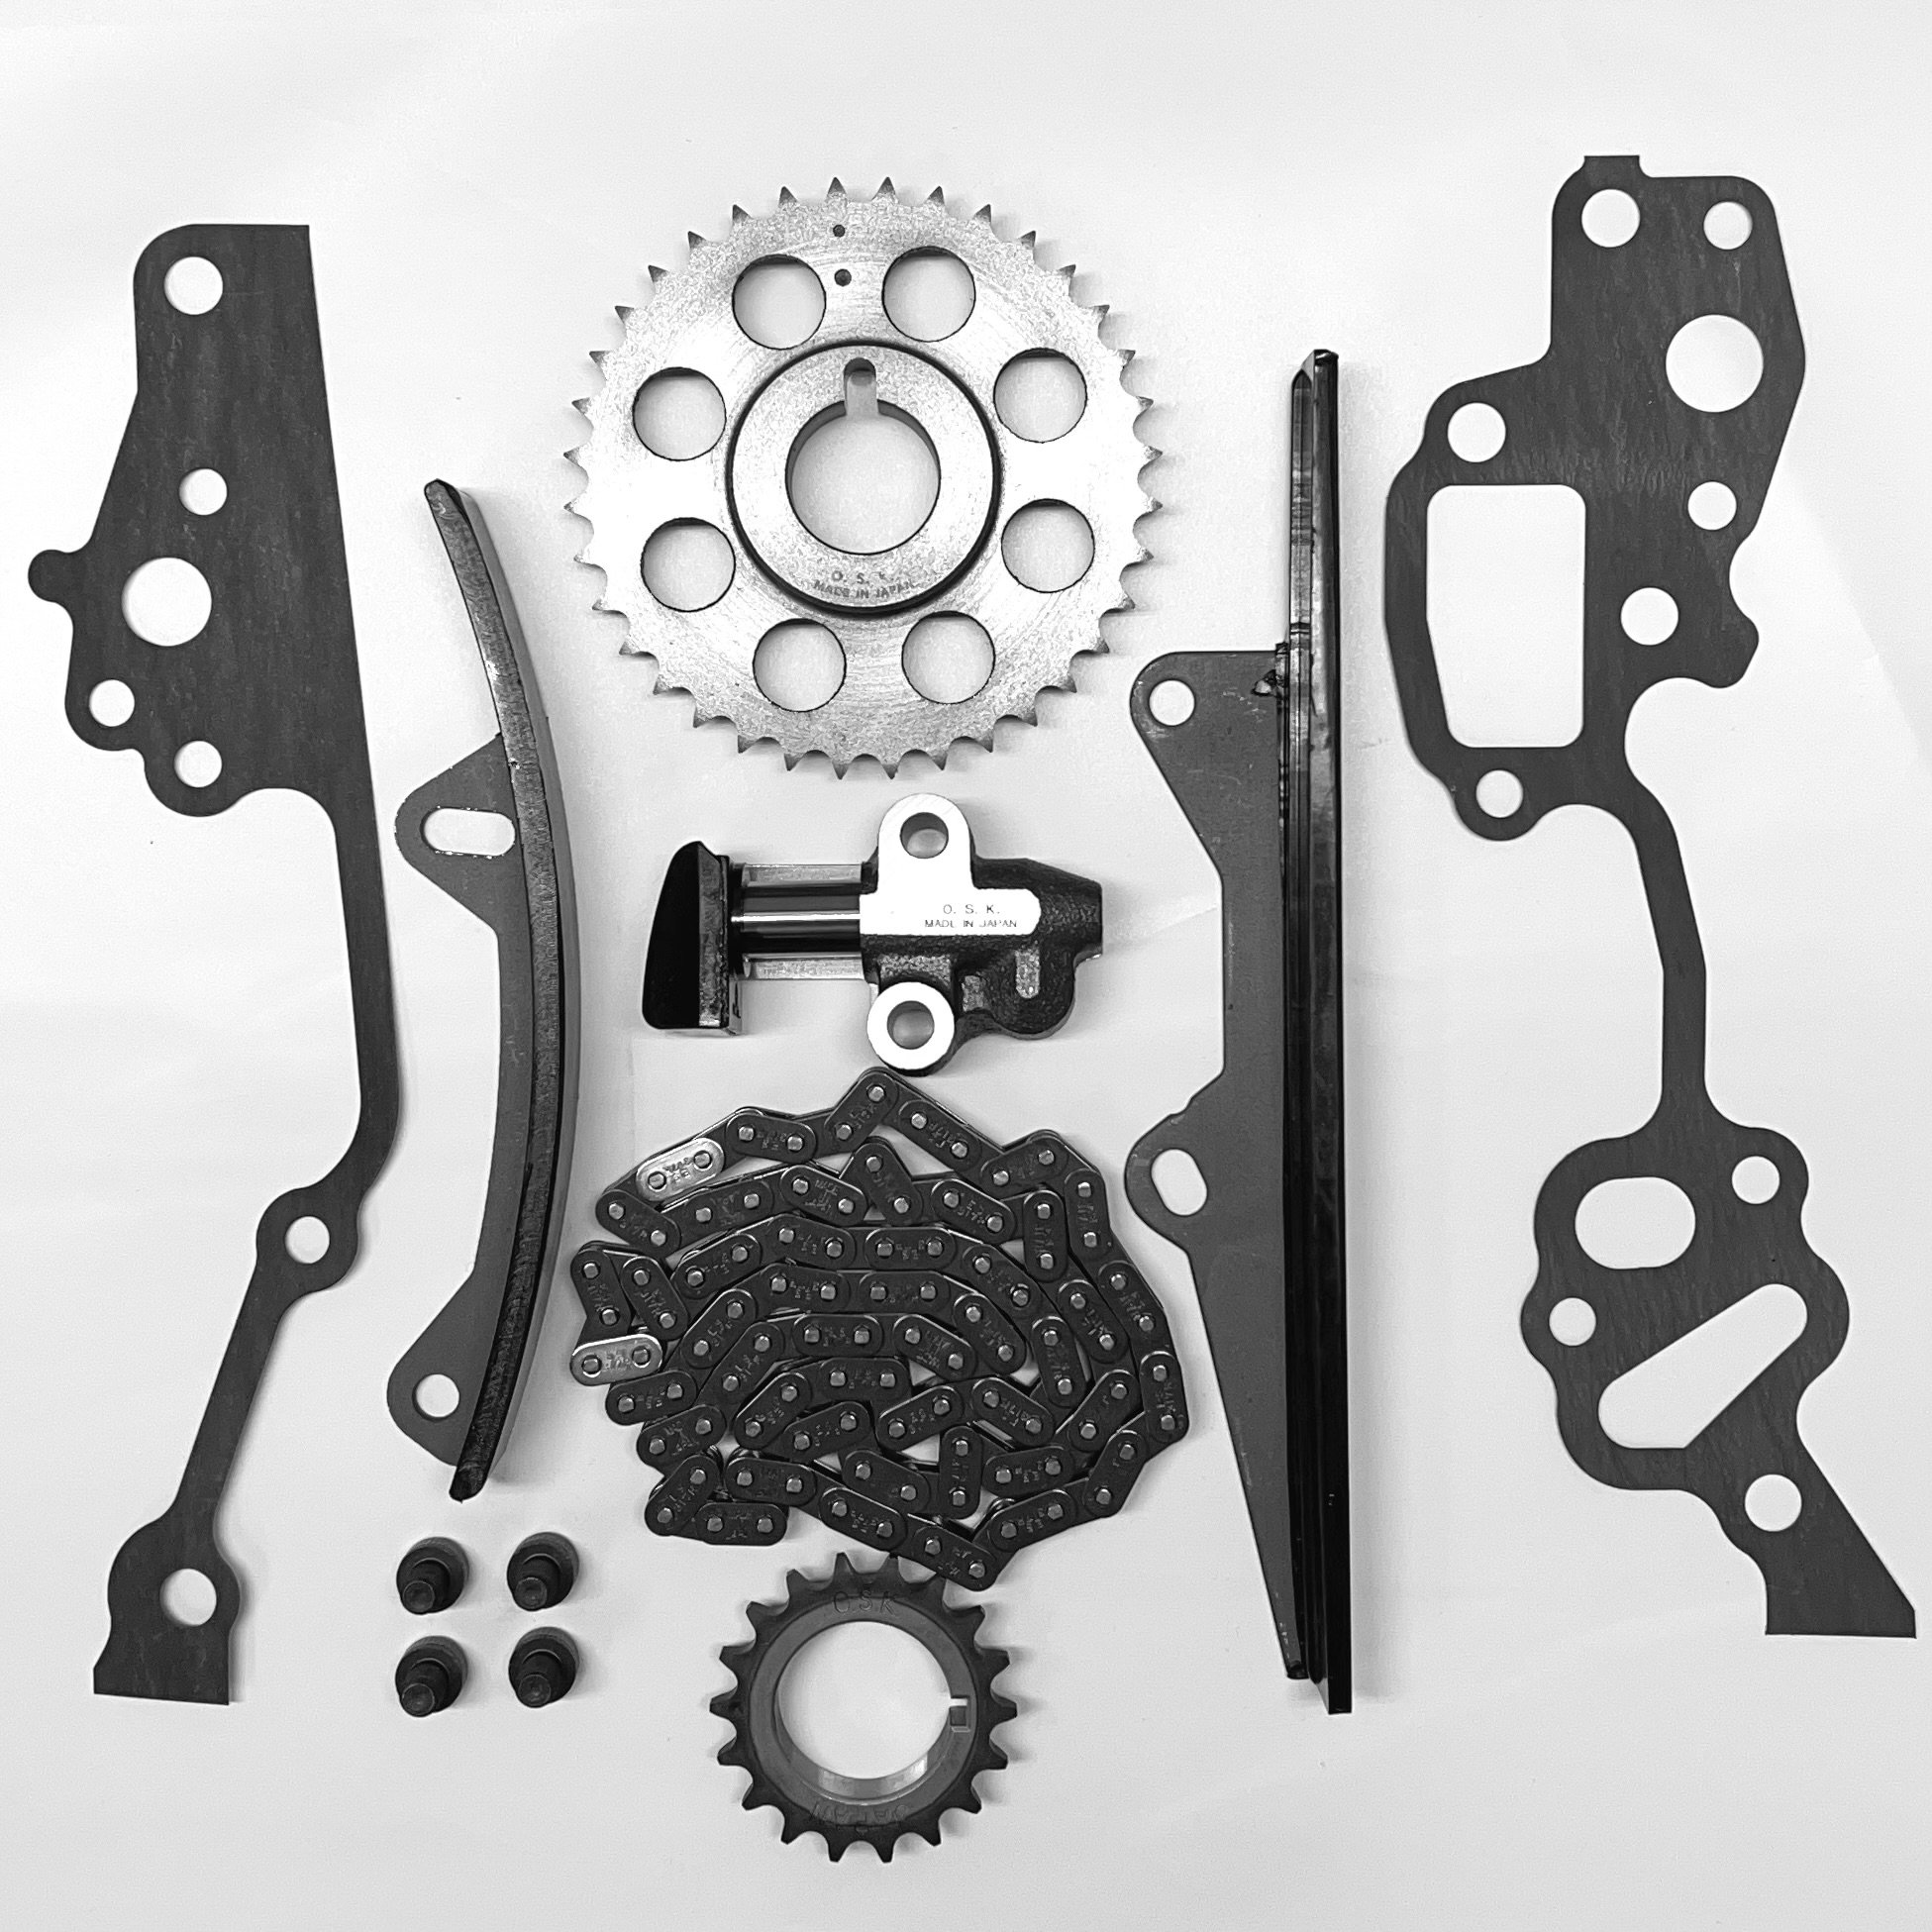 Evergreen TCK008BOP OSK Japan Timing Chain Kit Cover Oil Pump Compatible With 83-84 Toyota 2.4 SOHC 22R 22RE 